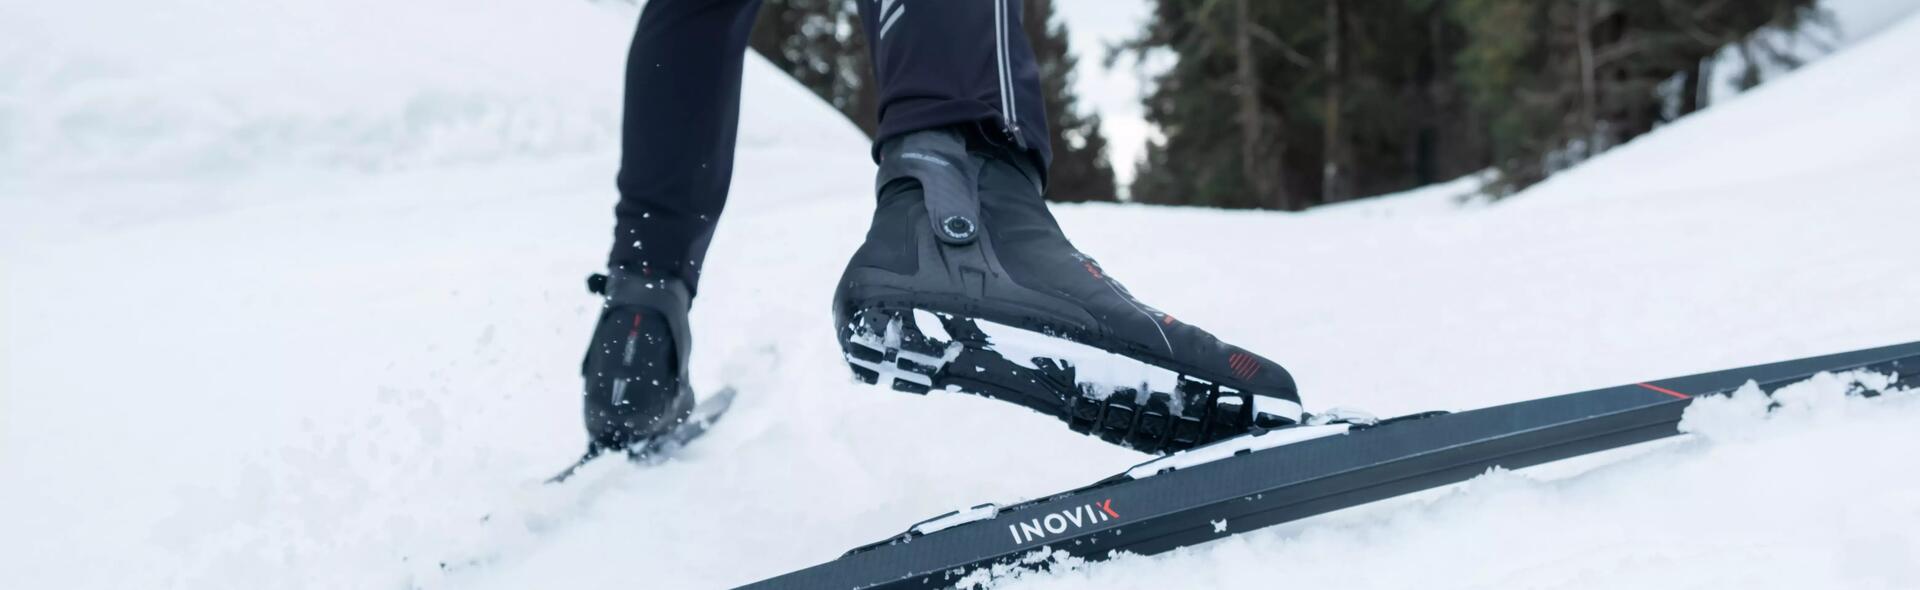 HOW TO CHOOSE SKATING CROSS-COUNTRY SKIING BOOTS?